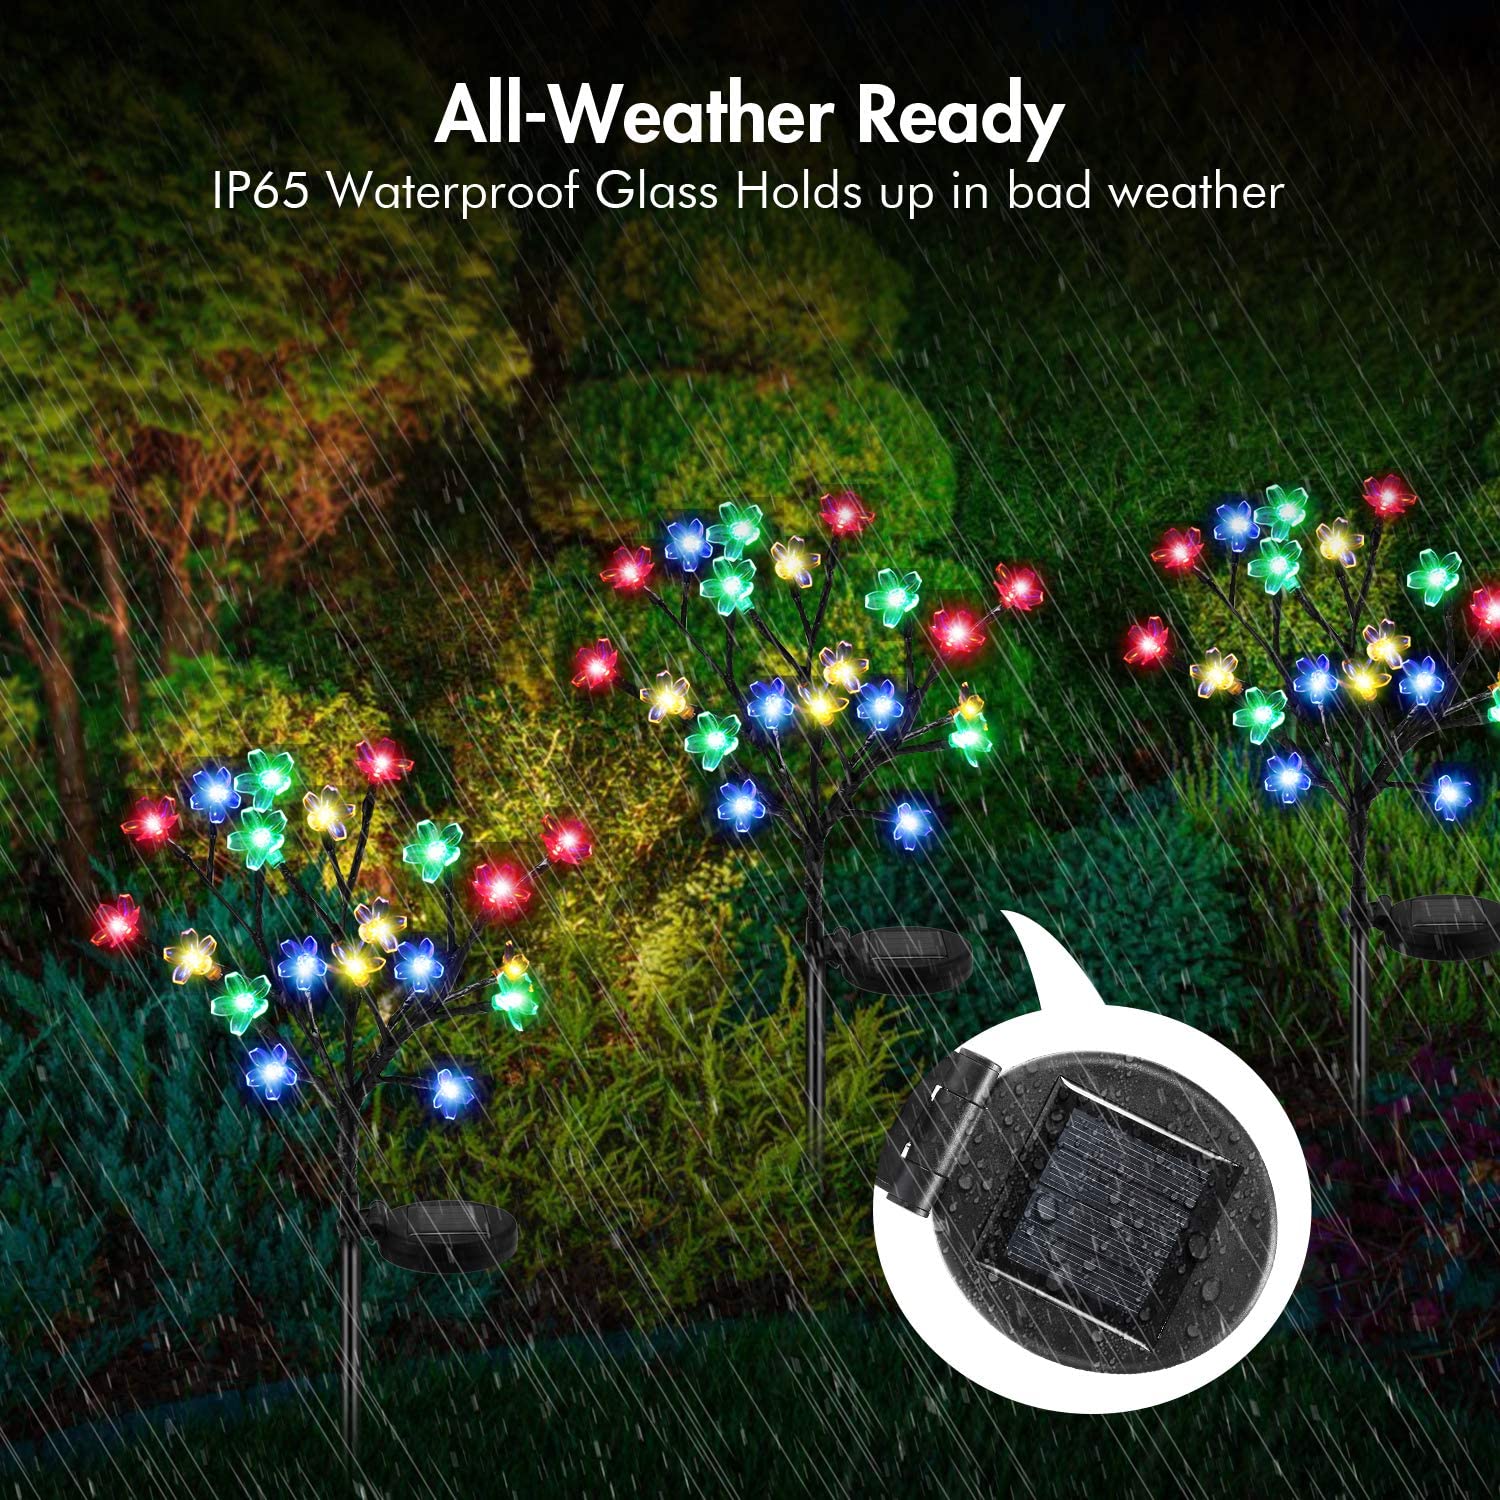 Garden Solar Lights Outdoor Decorative - LED Solar Powered Fairy Landscape Tree Lights,Beautiful Solar Flower Lights for Pathway Patio Yard Deck Walkway|Christmas Party Decor 2Pack - image 4 of 8